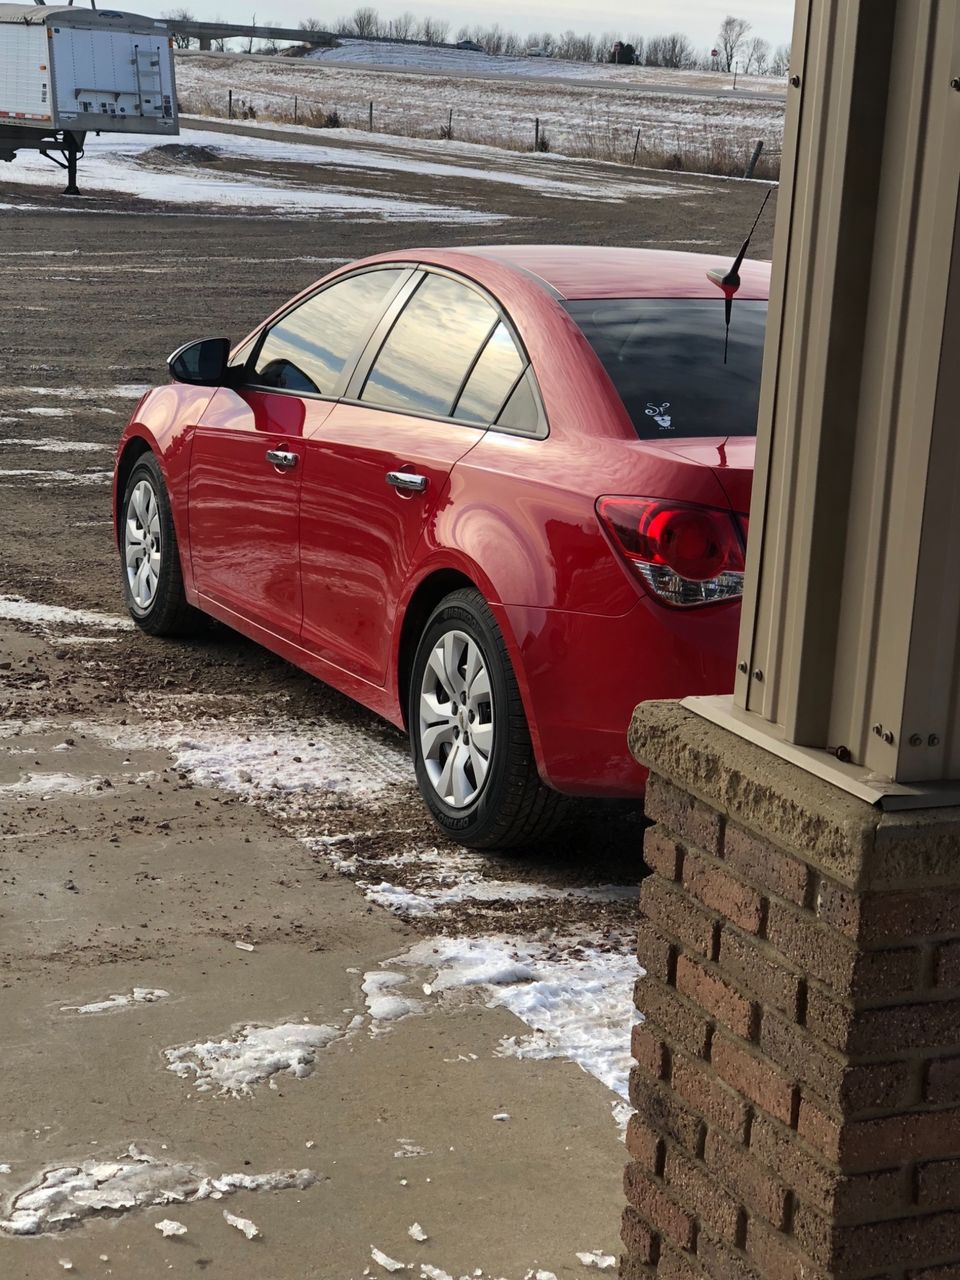 2014 Chevrolet Cruze LS Auto | Sioux Falls, SD, Red Hot (Red & Orange), Front Wheel